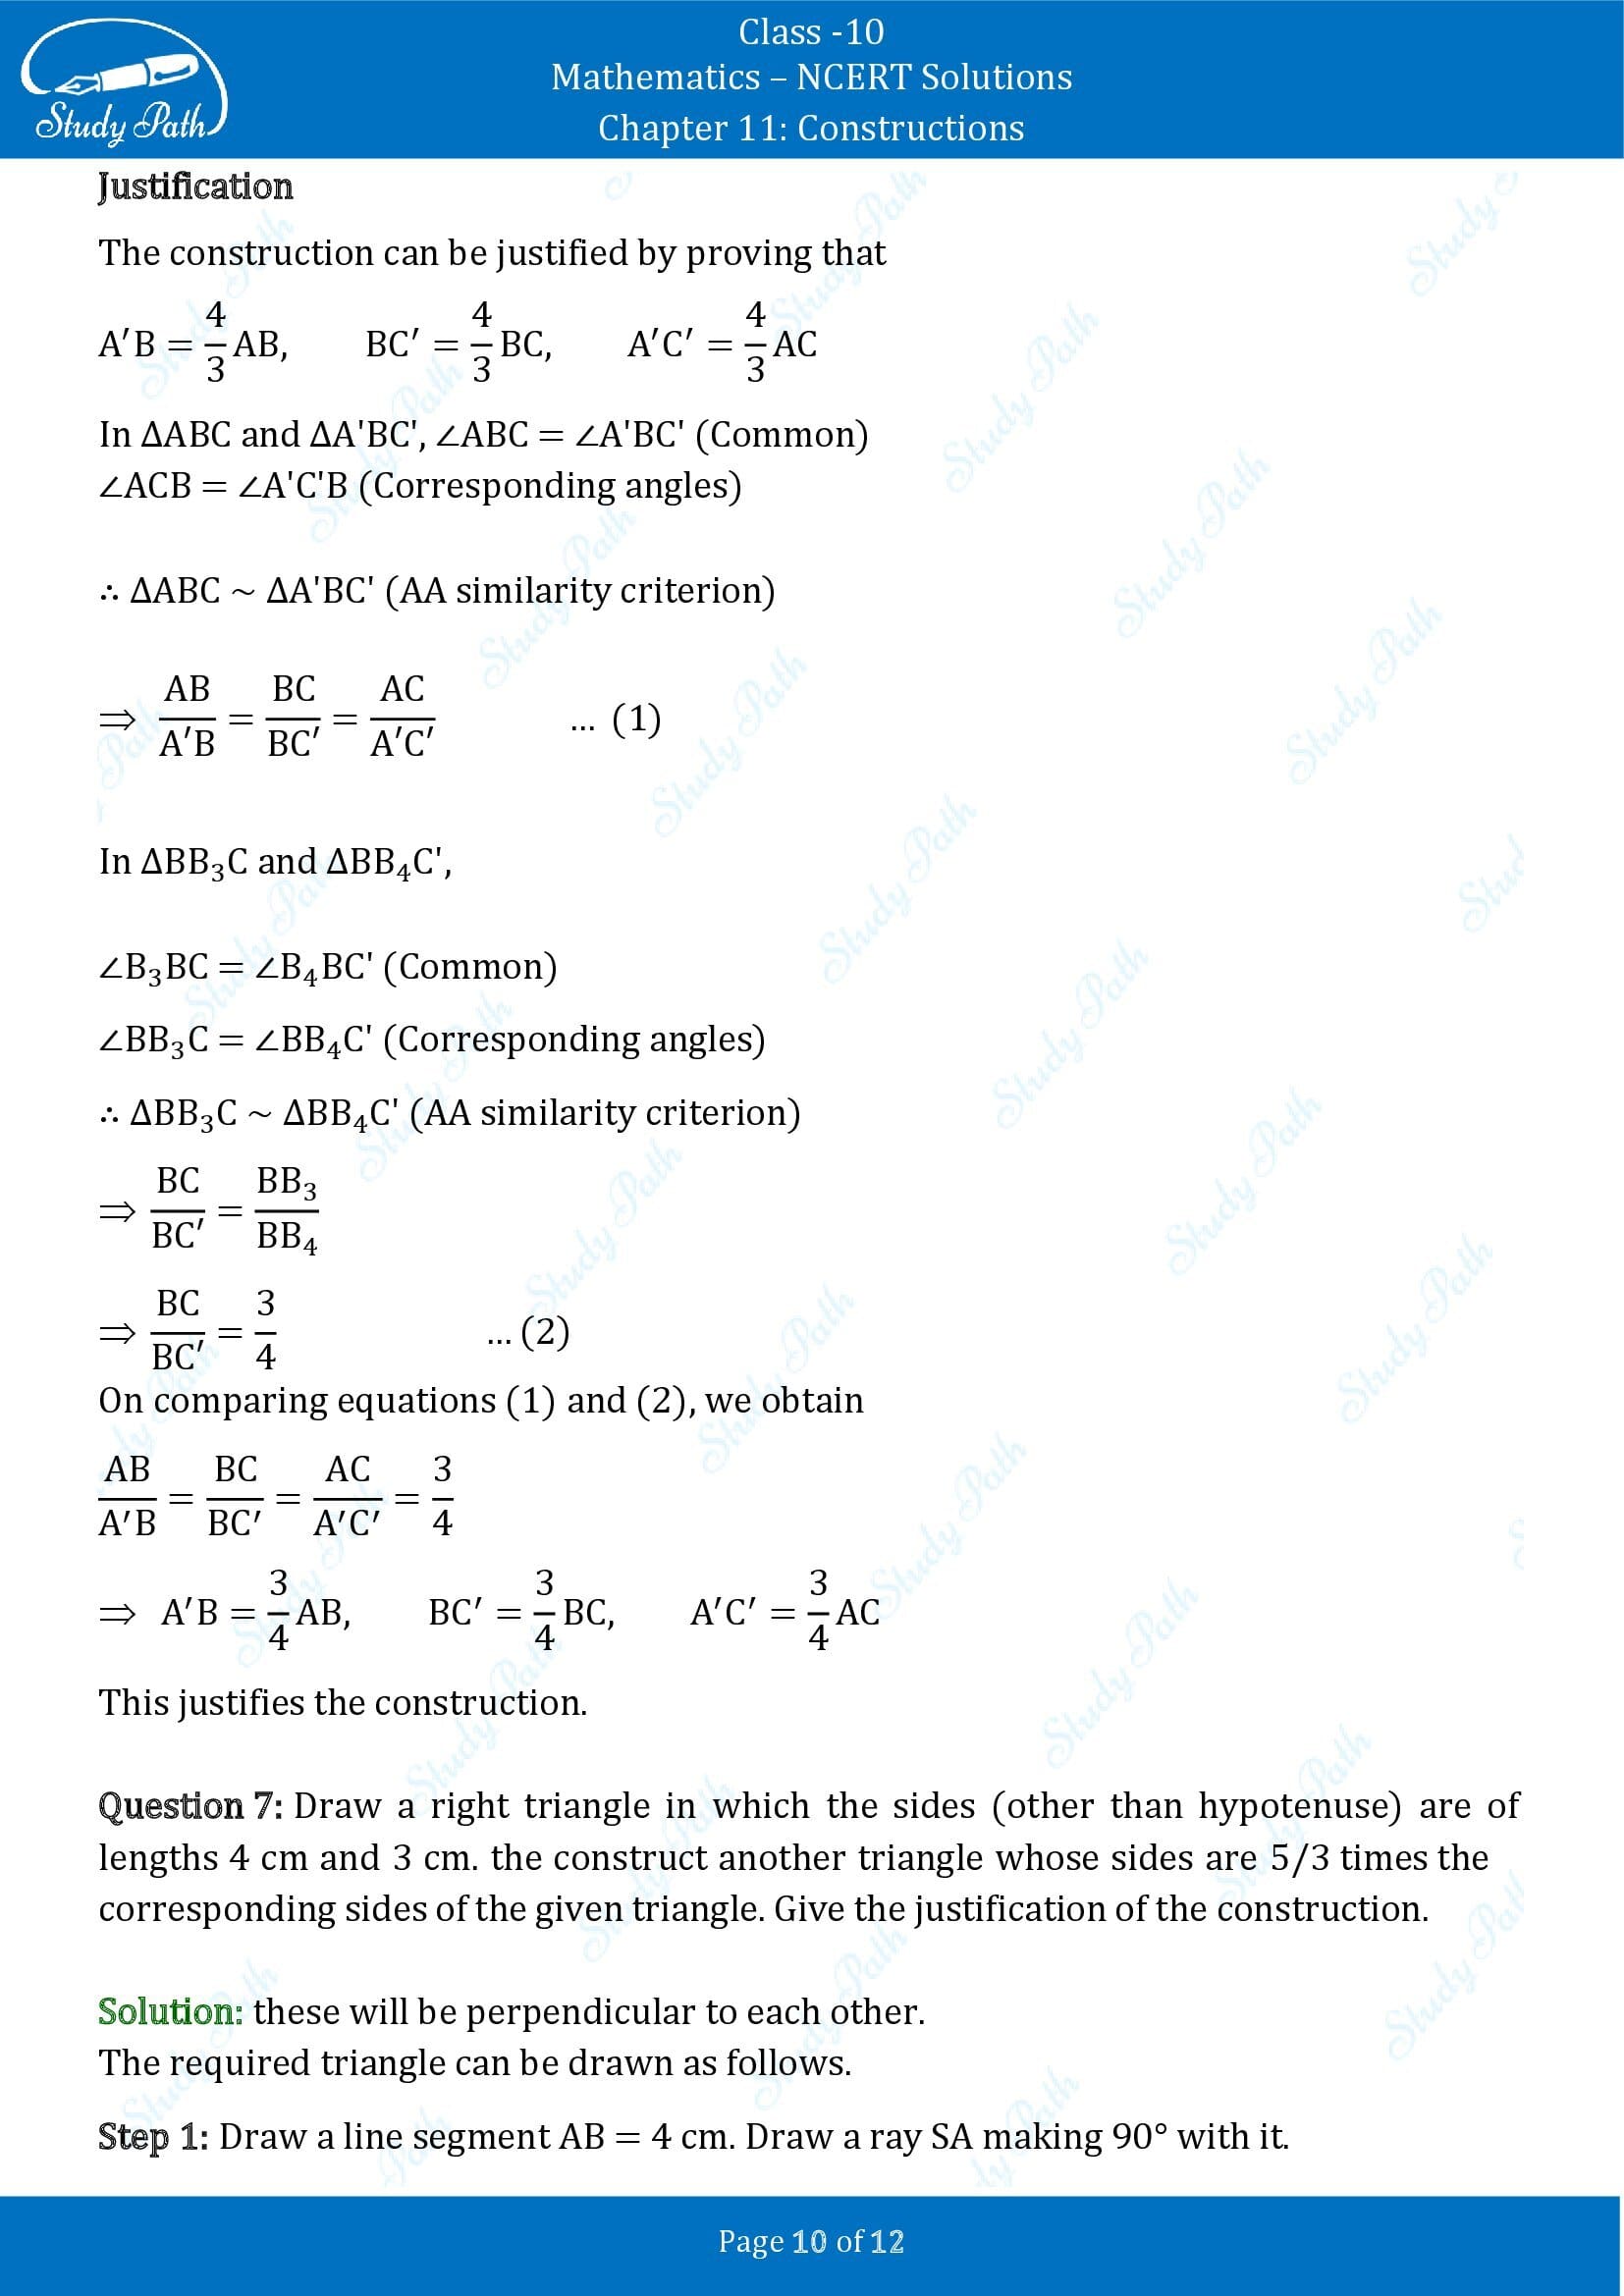 NCERT Solutions for Class 10 Maths Chapter 11 Constructions Exercise 11.1 00010